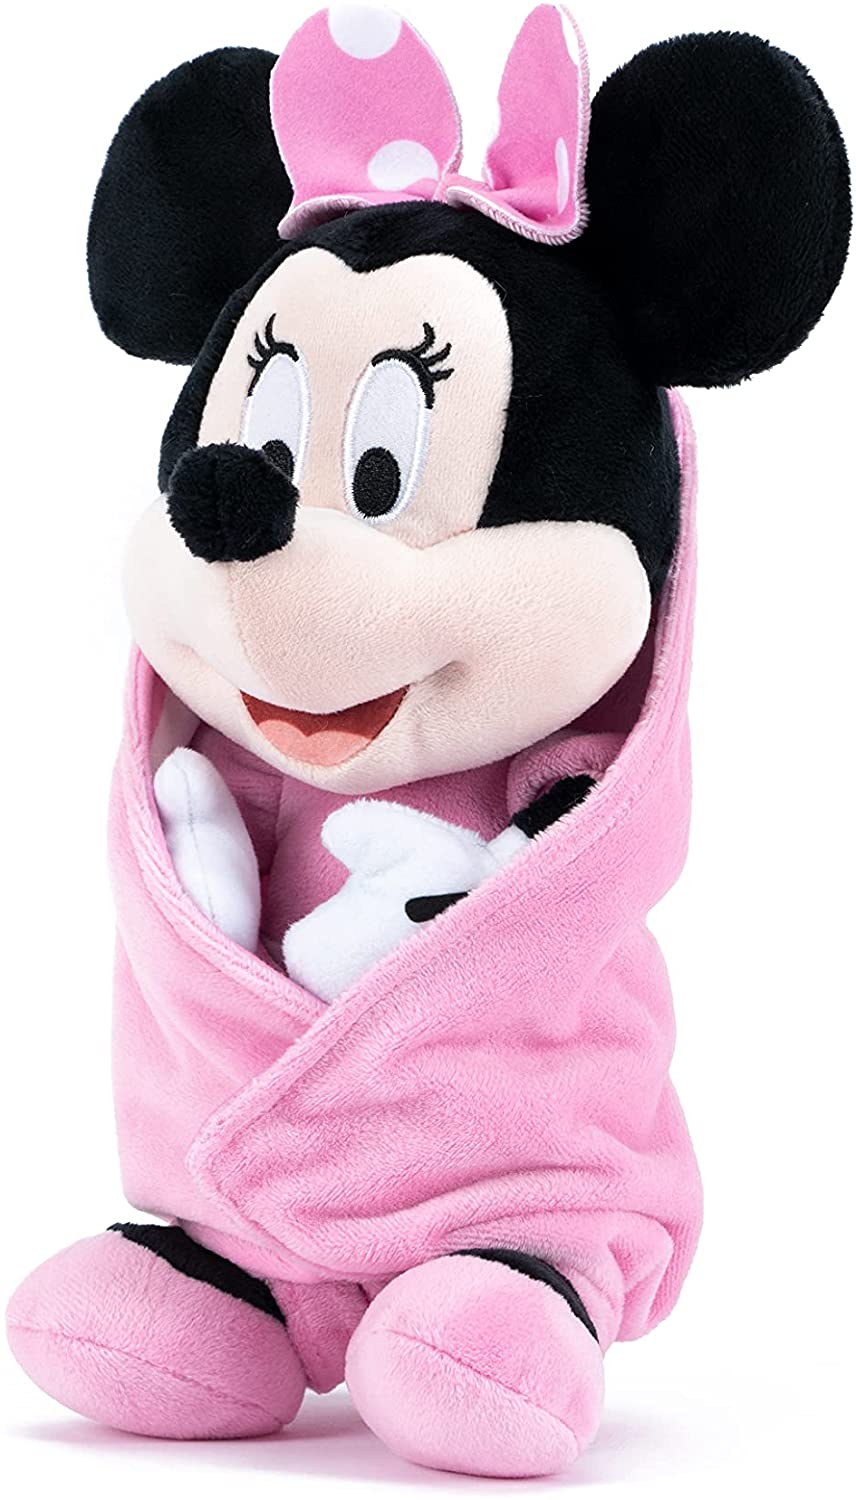 Simba Toys - Minnie plush 25 cm with extra soft blanket, 100% official license,